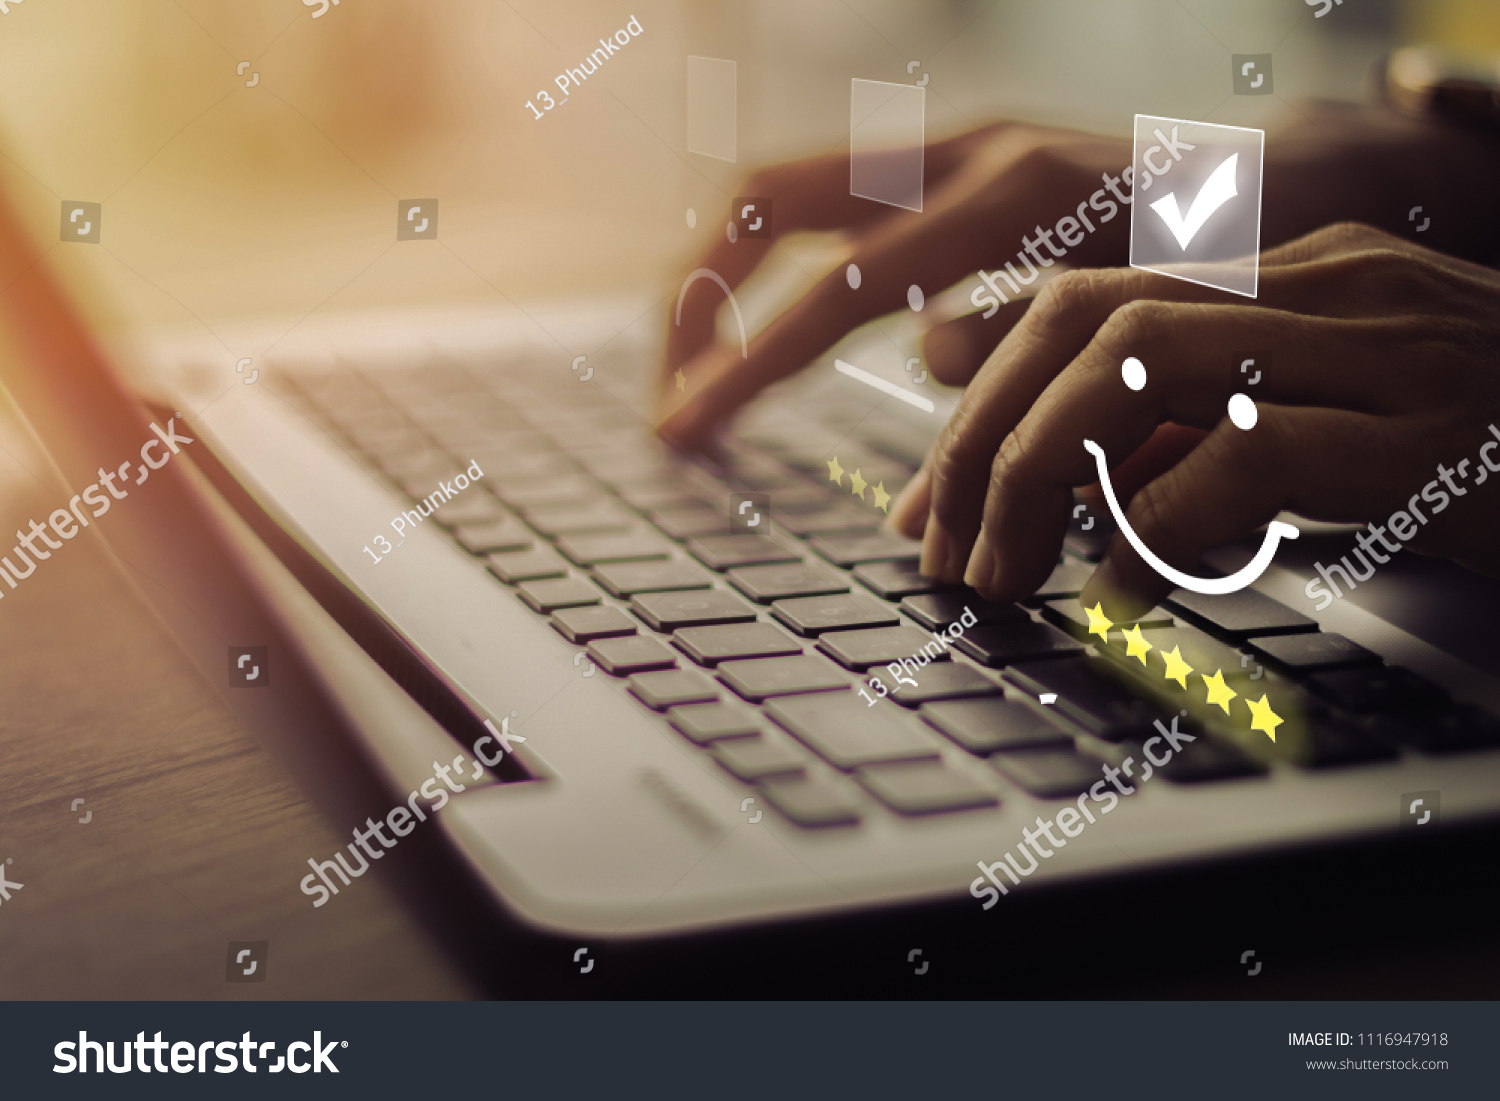 Businesswoman pressing smiley on keyboard laptop .Customer service evaluation concept.
 #1116947918